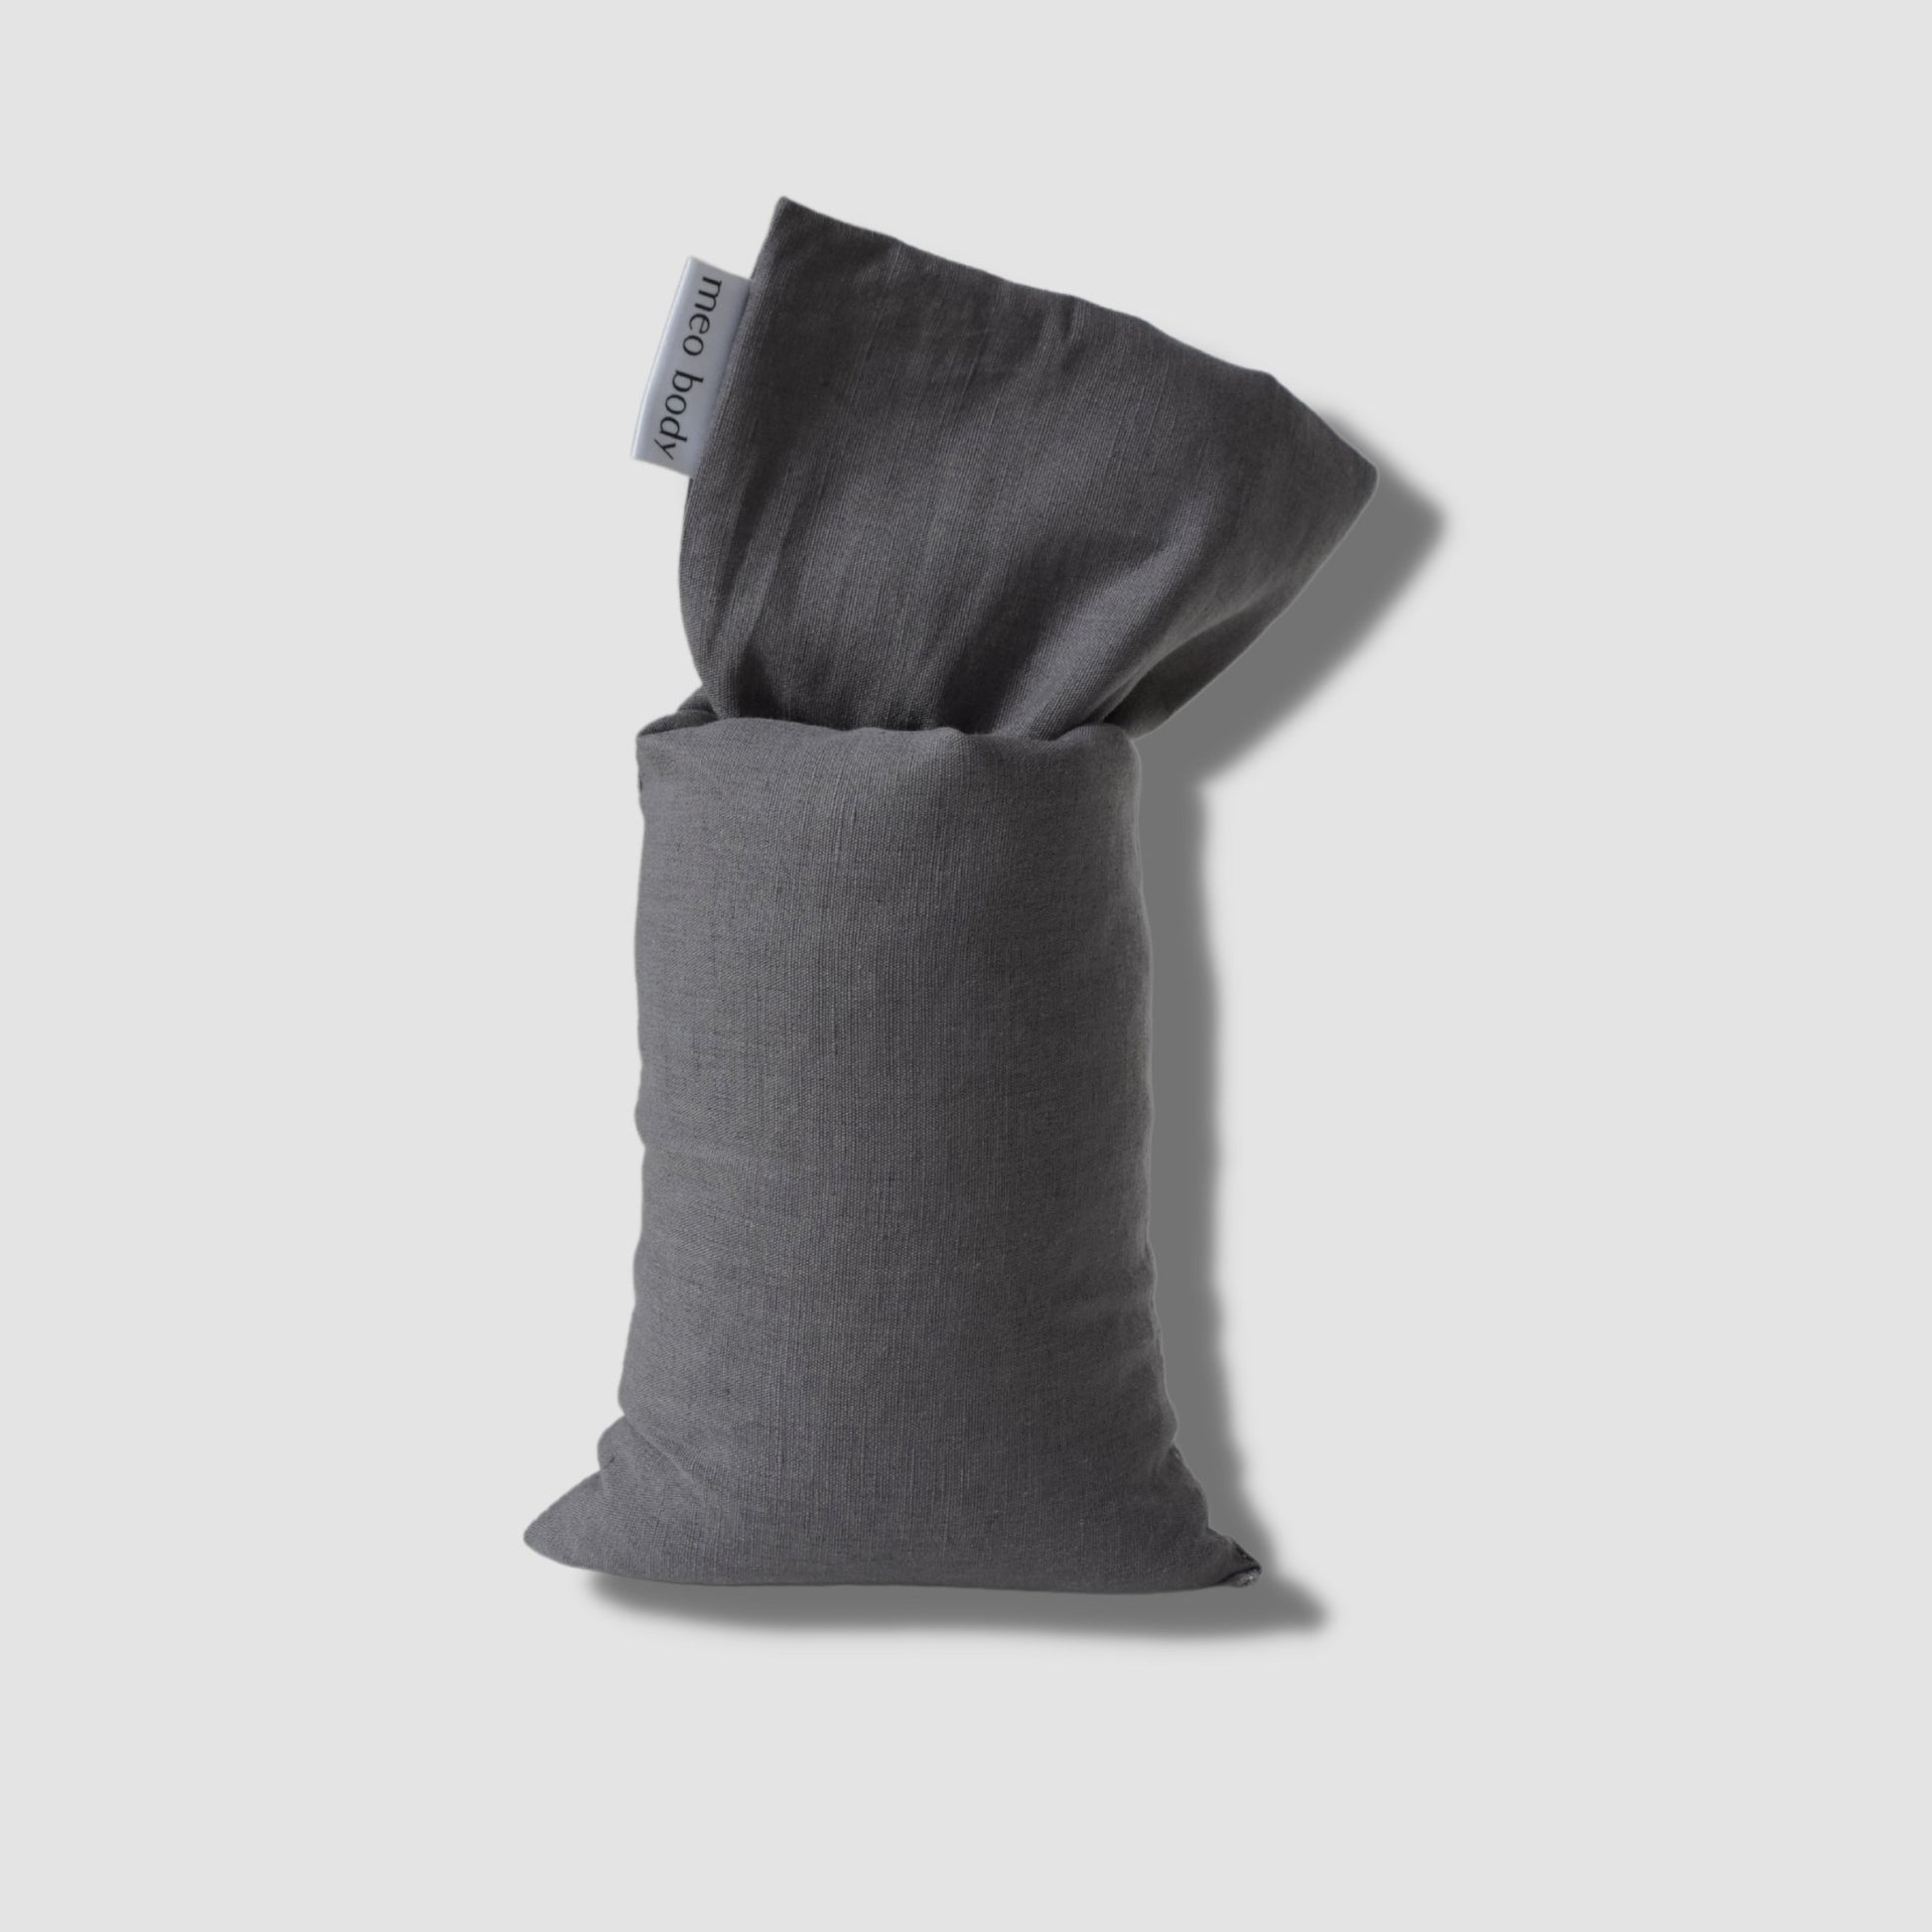 Hand-crafted Wheat Heat Pack, 'Grey' design - Meo Body